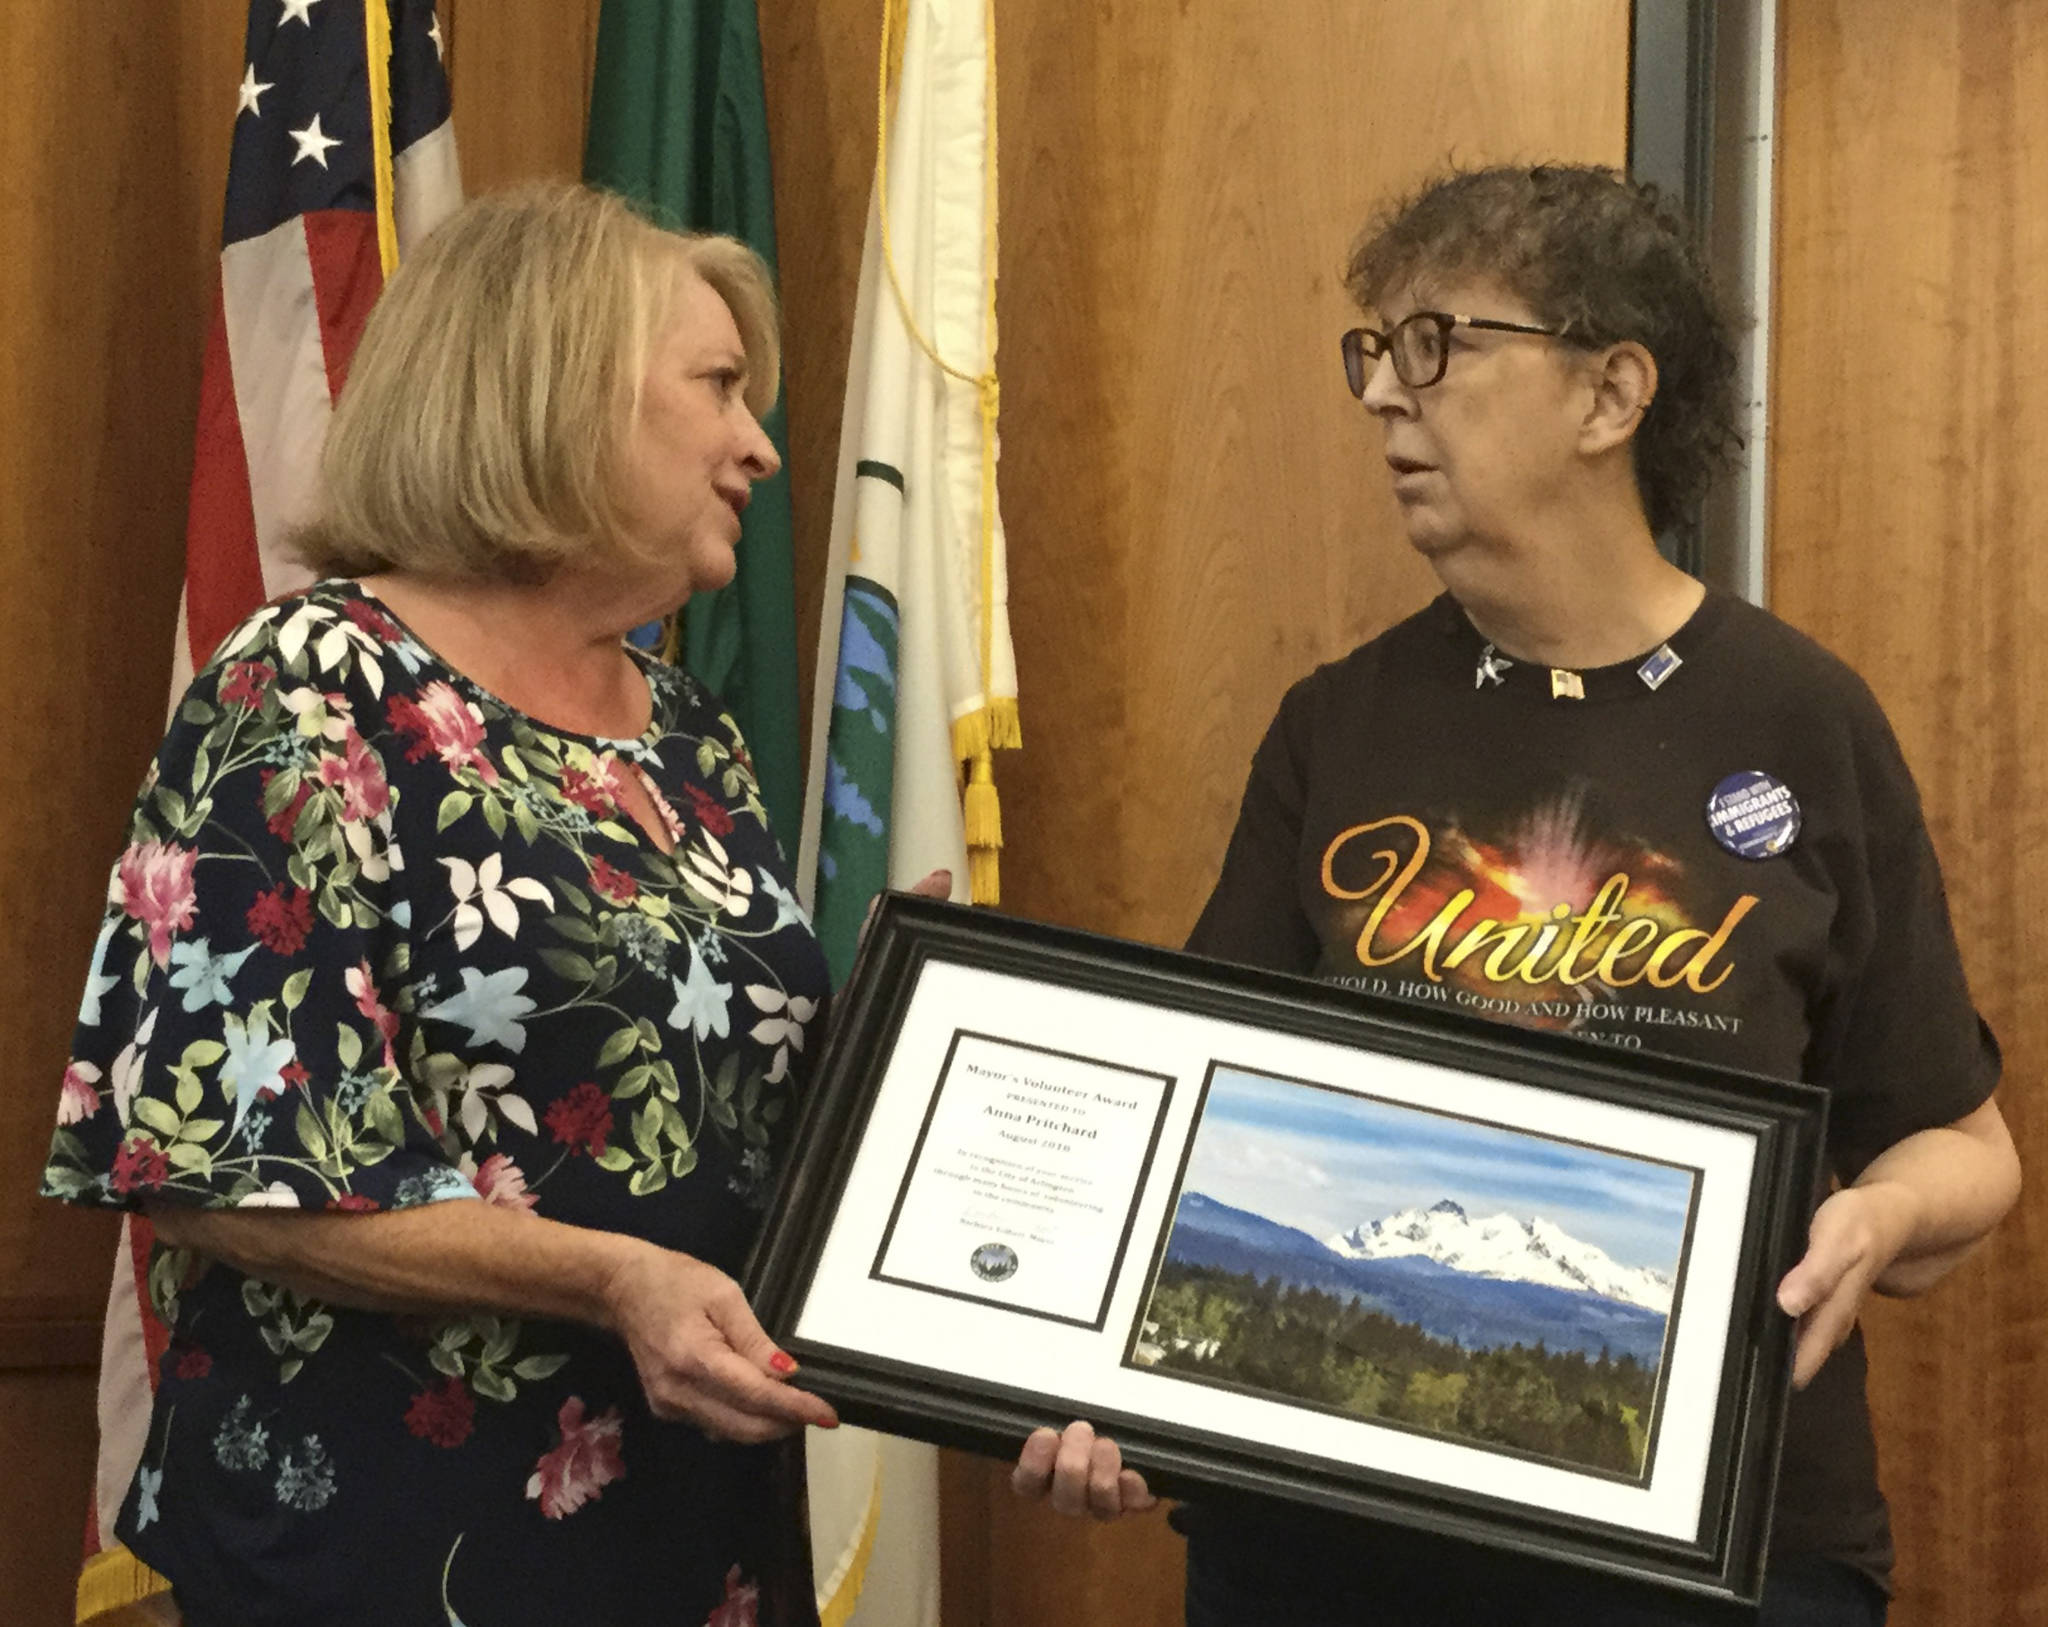 Advocate who works with seniors, mentally ill honored with Mayor’s volunteer award